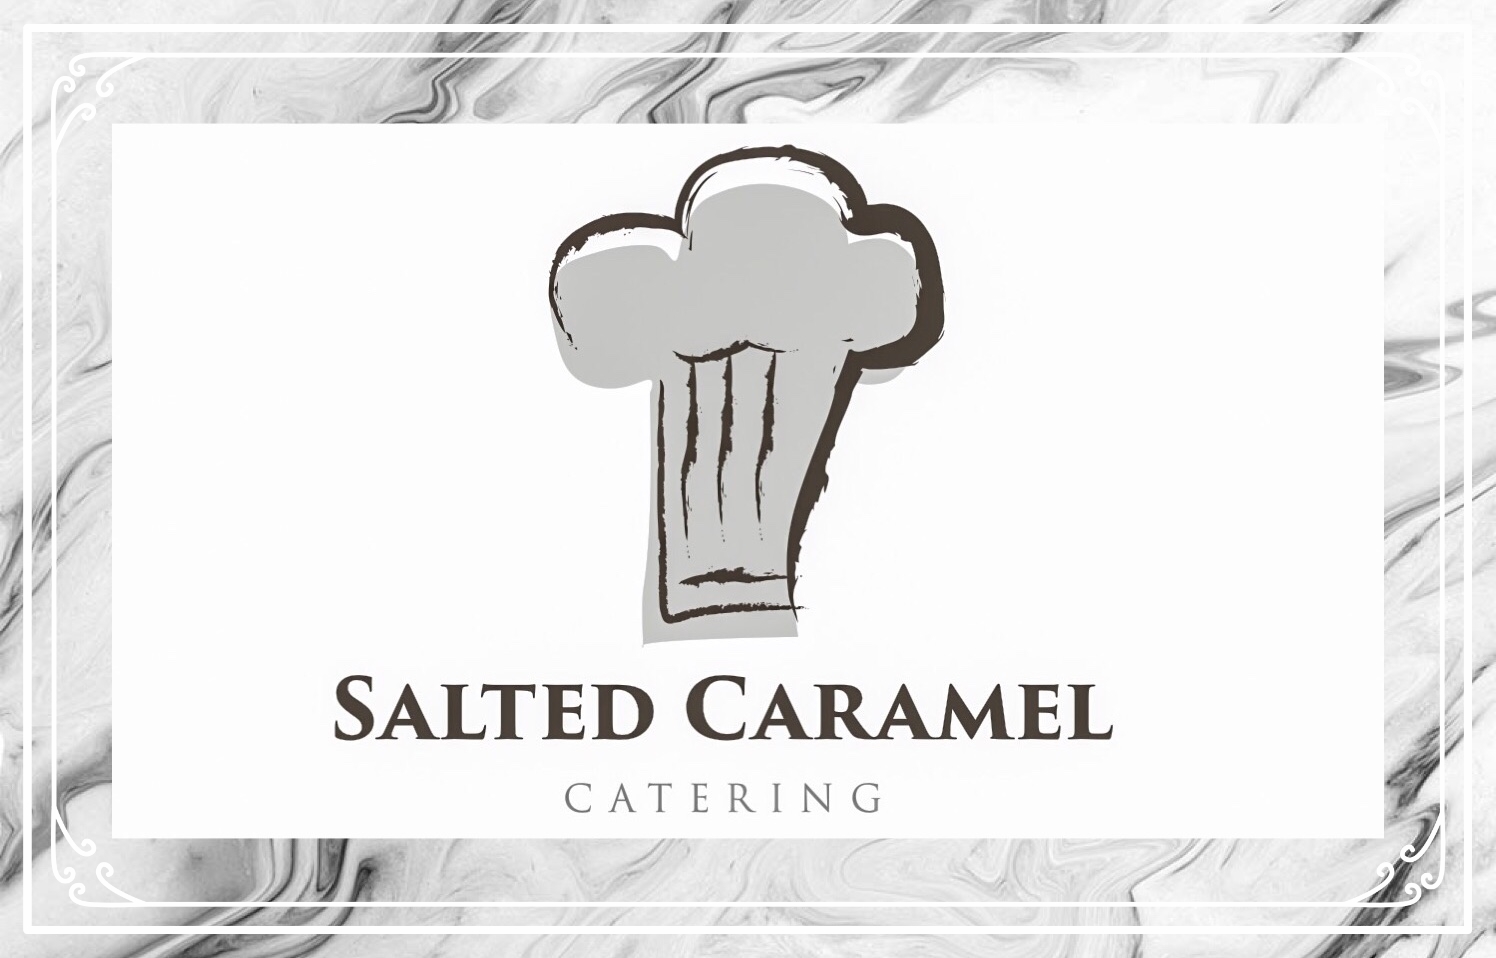 SALTED CARAMEL CATERING